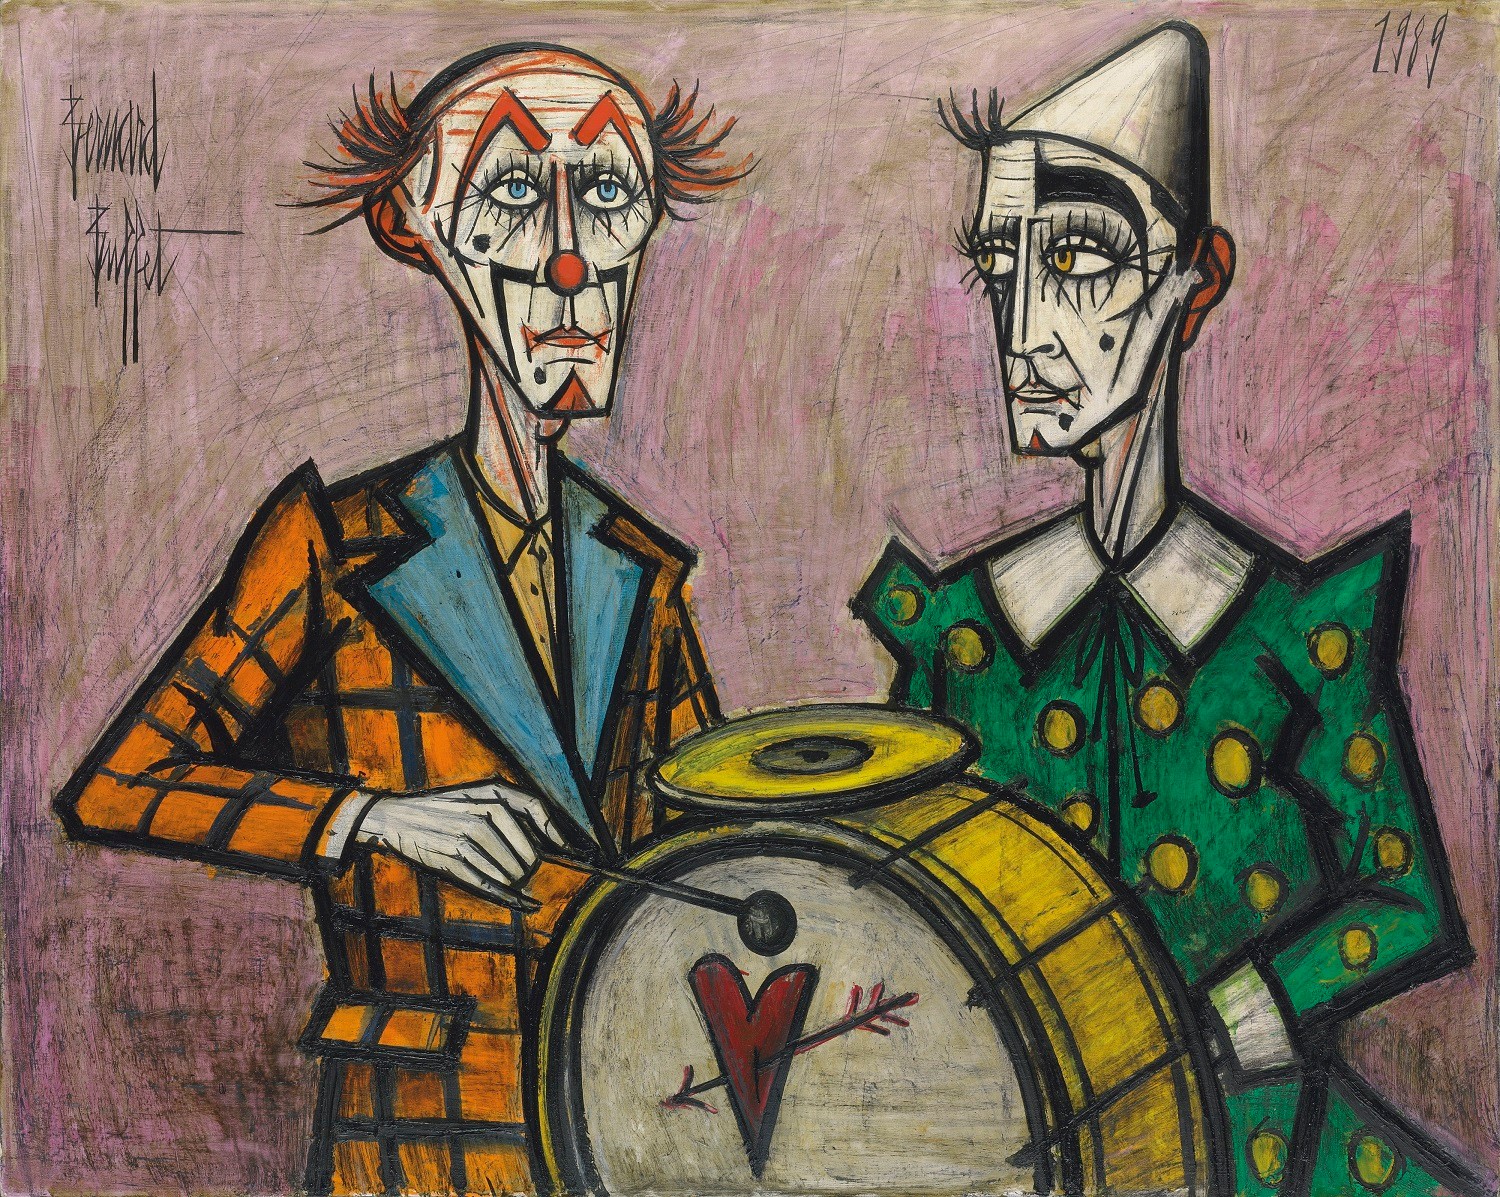 Bernard Buffet's Existentialist Paintings Will Definitely Bum You Out